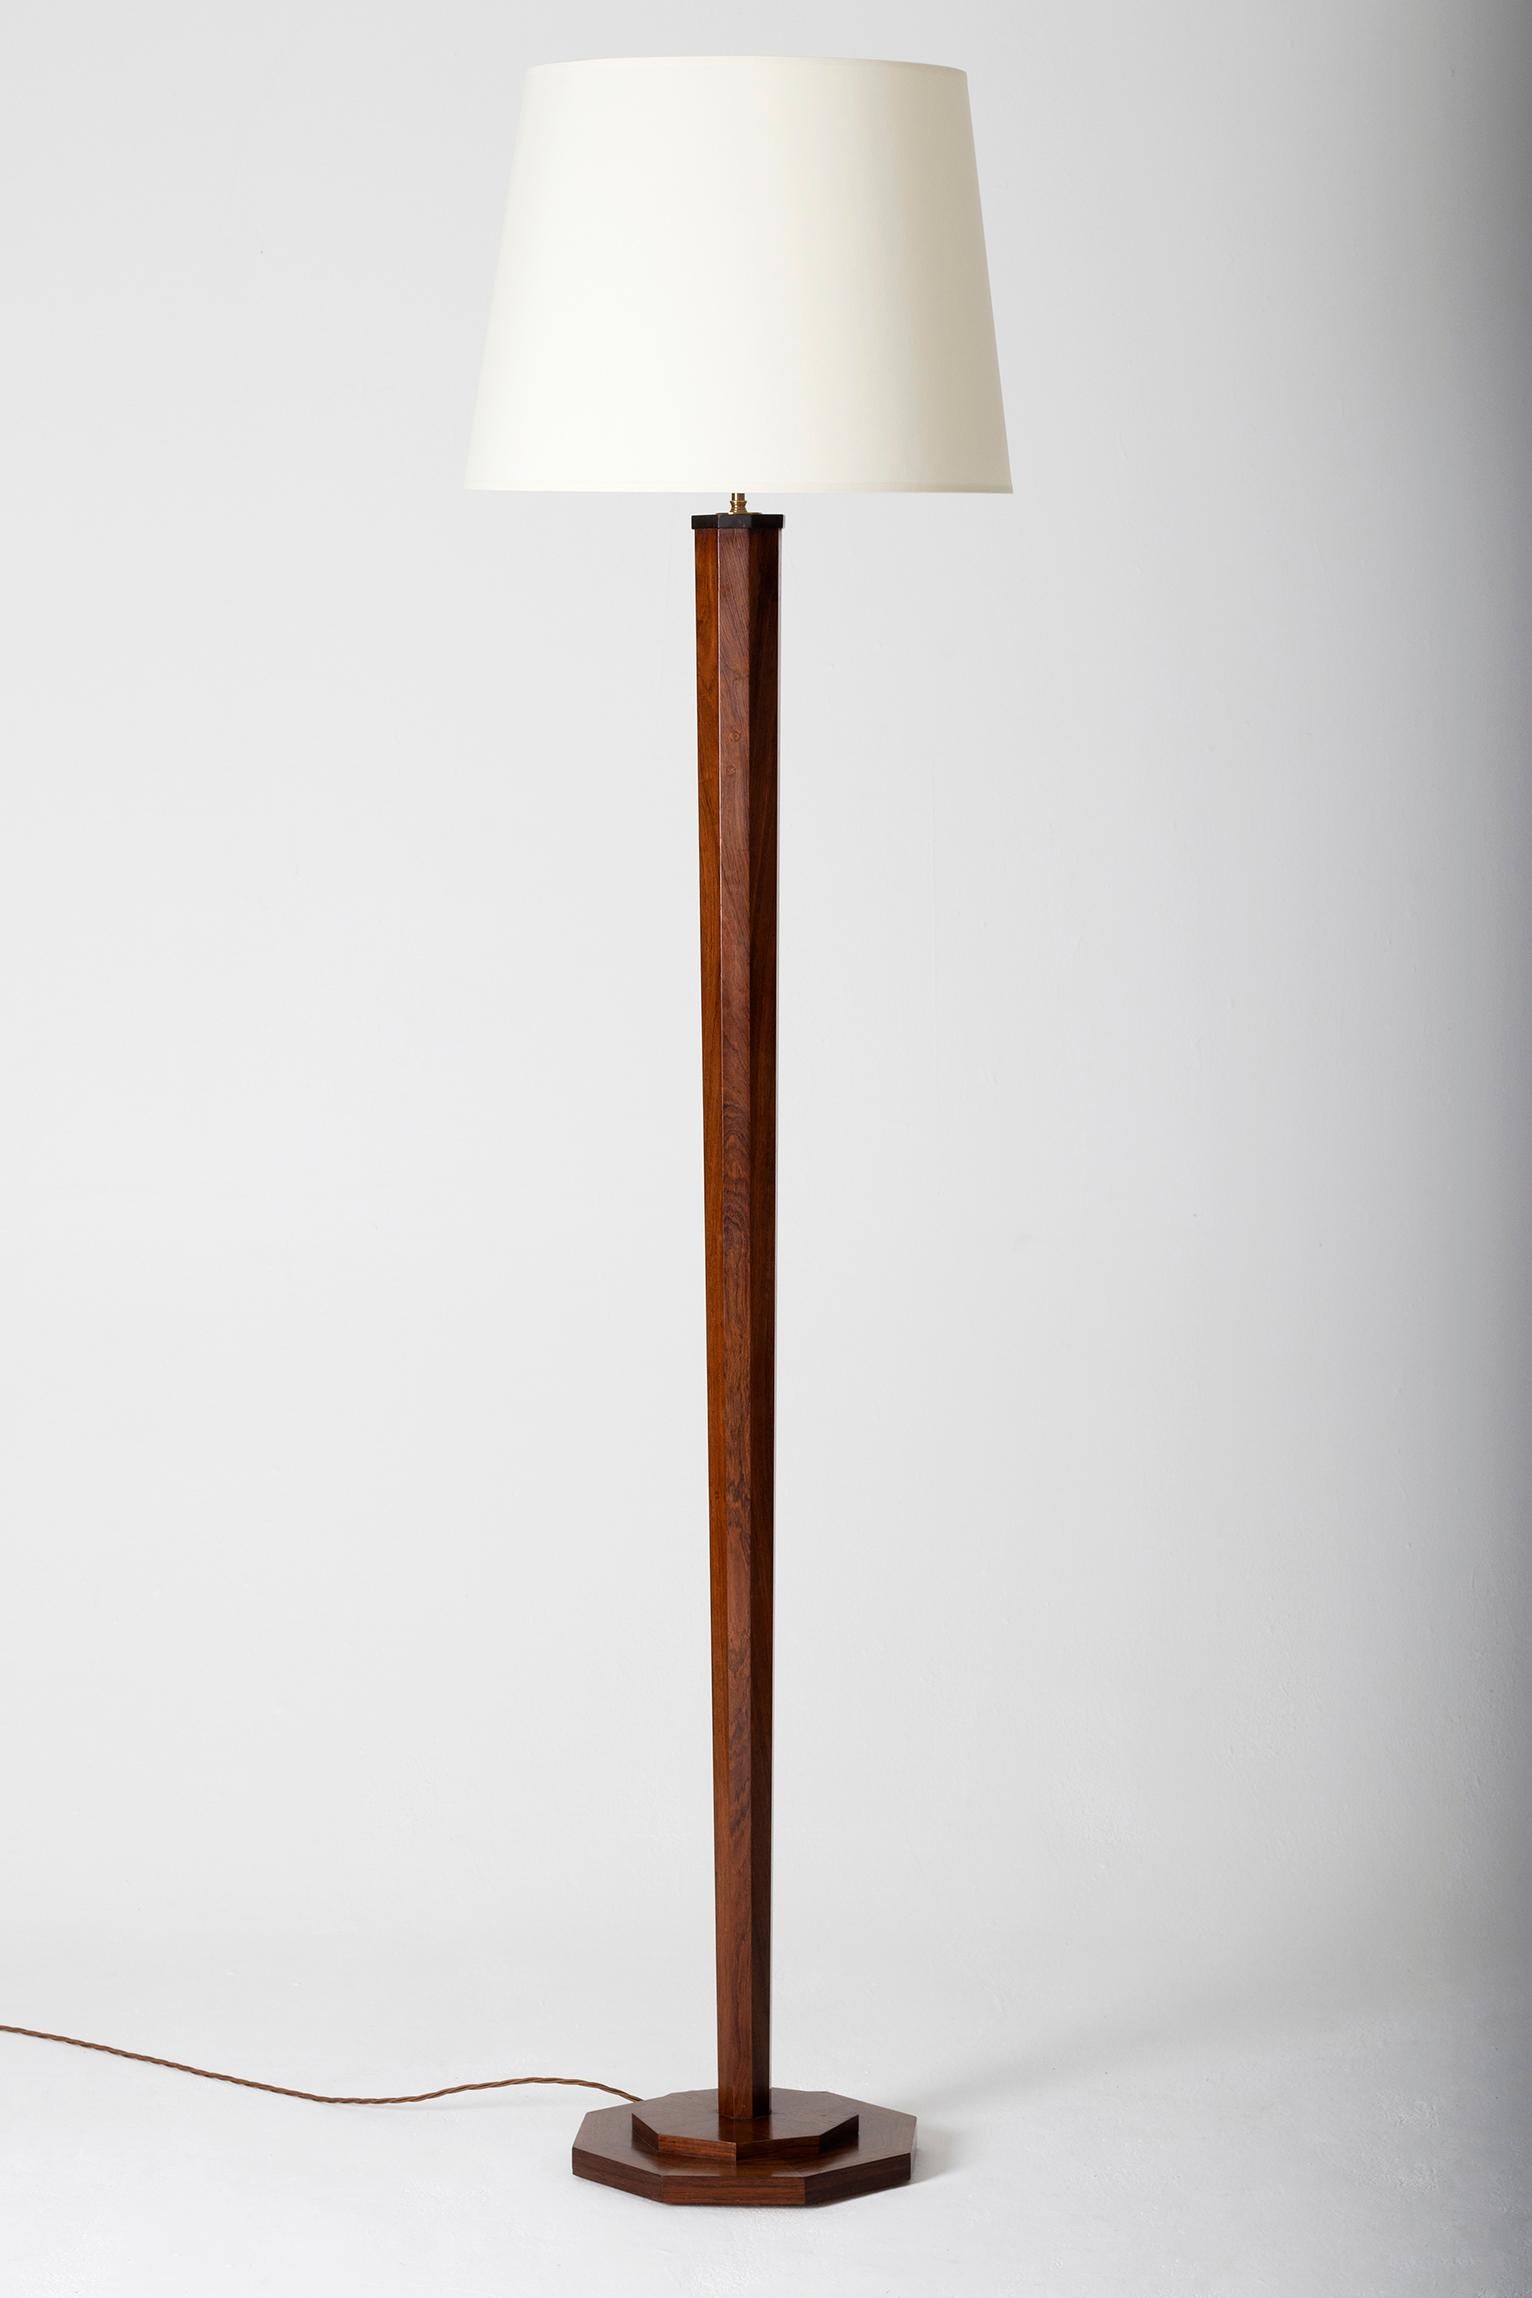 An Art Deco mahogany veneer floor lamp,
The octagonal stepped base supporting a tall tapering and faceted stem.
France, circa 1930
Measures: Including the shade 196 cm tall by 51 cm diameter
Lamp base only 157 cm tall by 33 cm diameter.